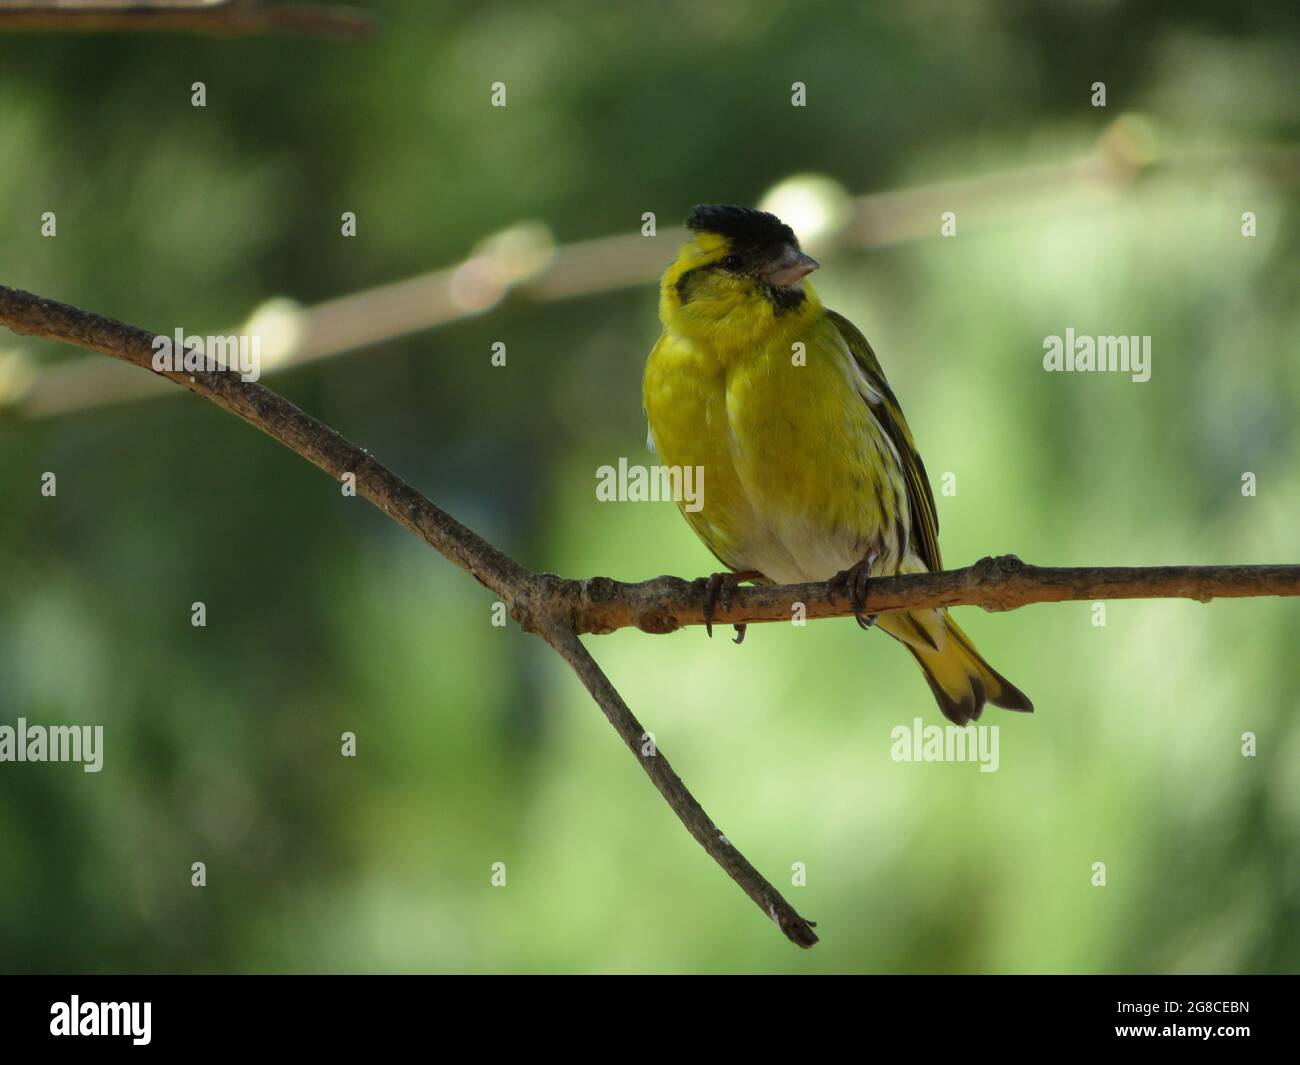 Eusarian siskin, Spinus spinus, perching in a branch Stock Photo